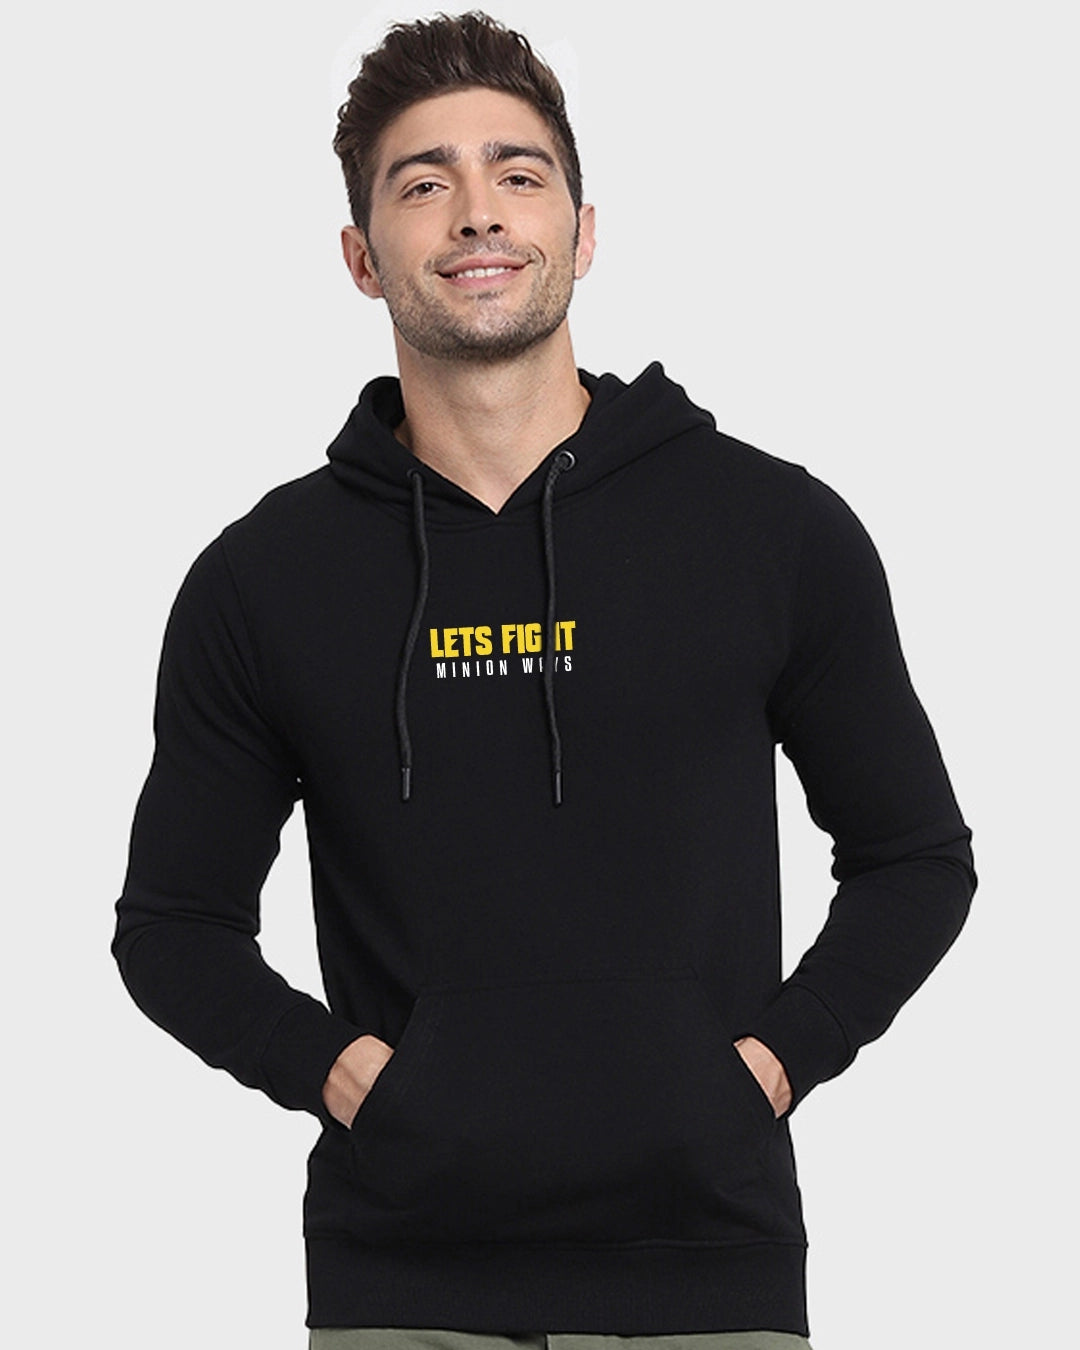 Men's Black Lets Fight Graphic Printed Hoodie